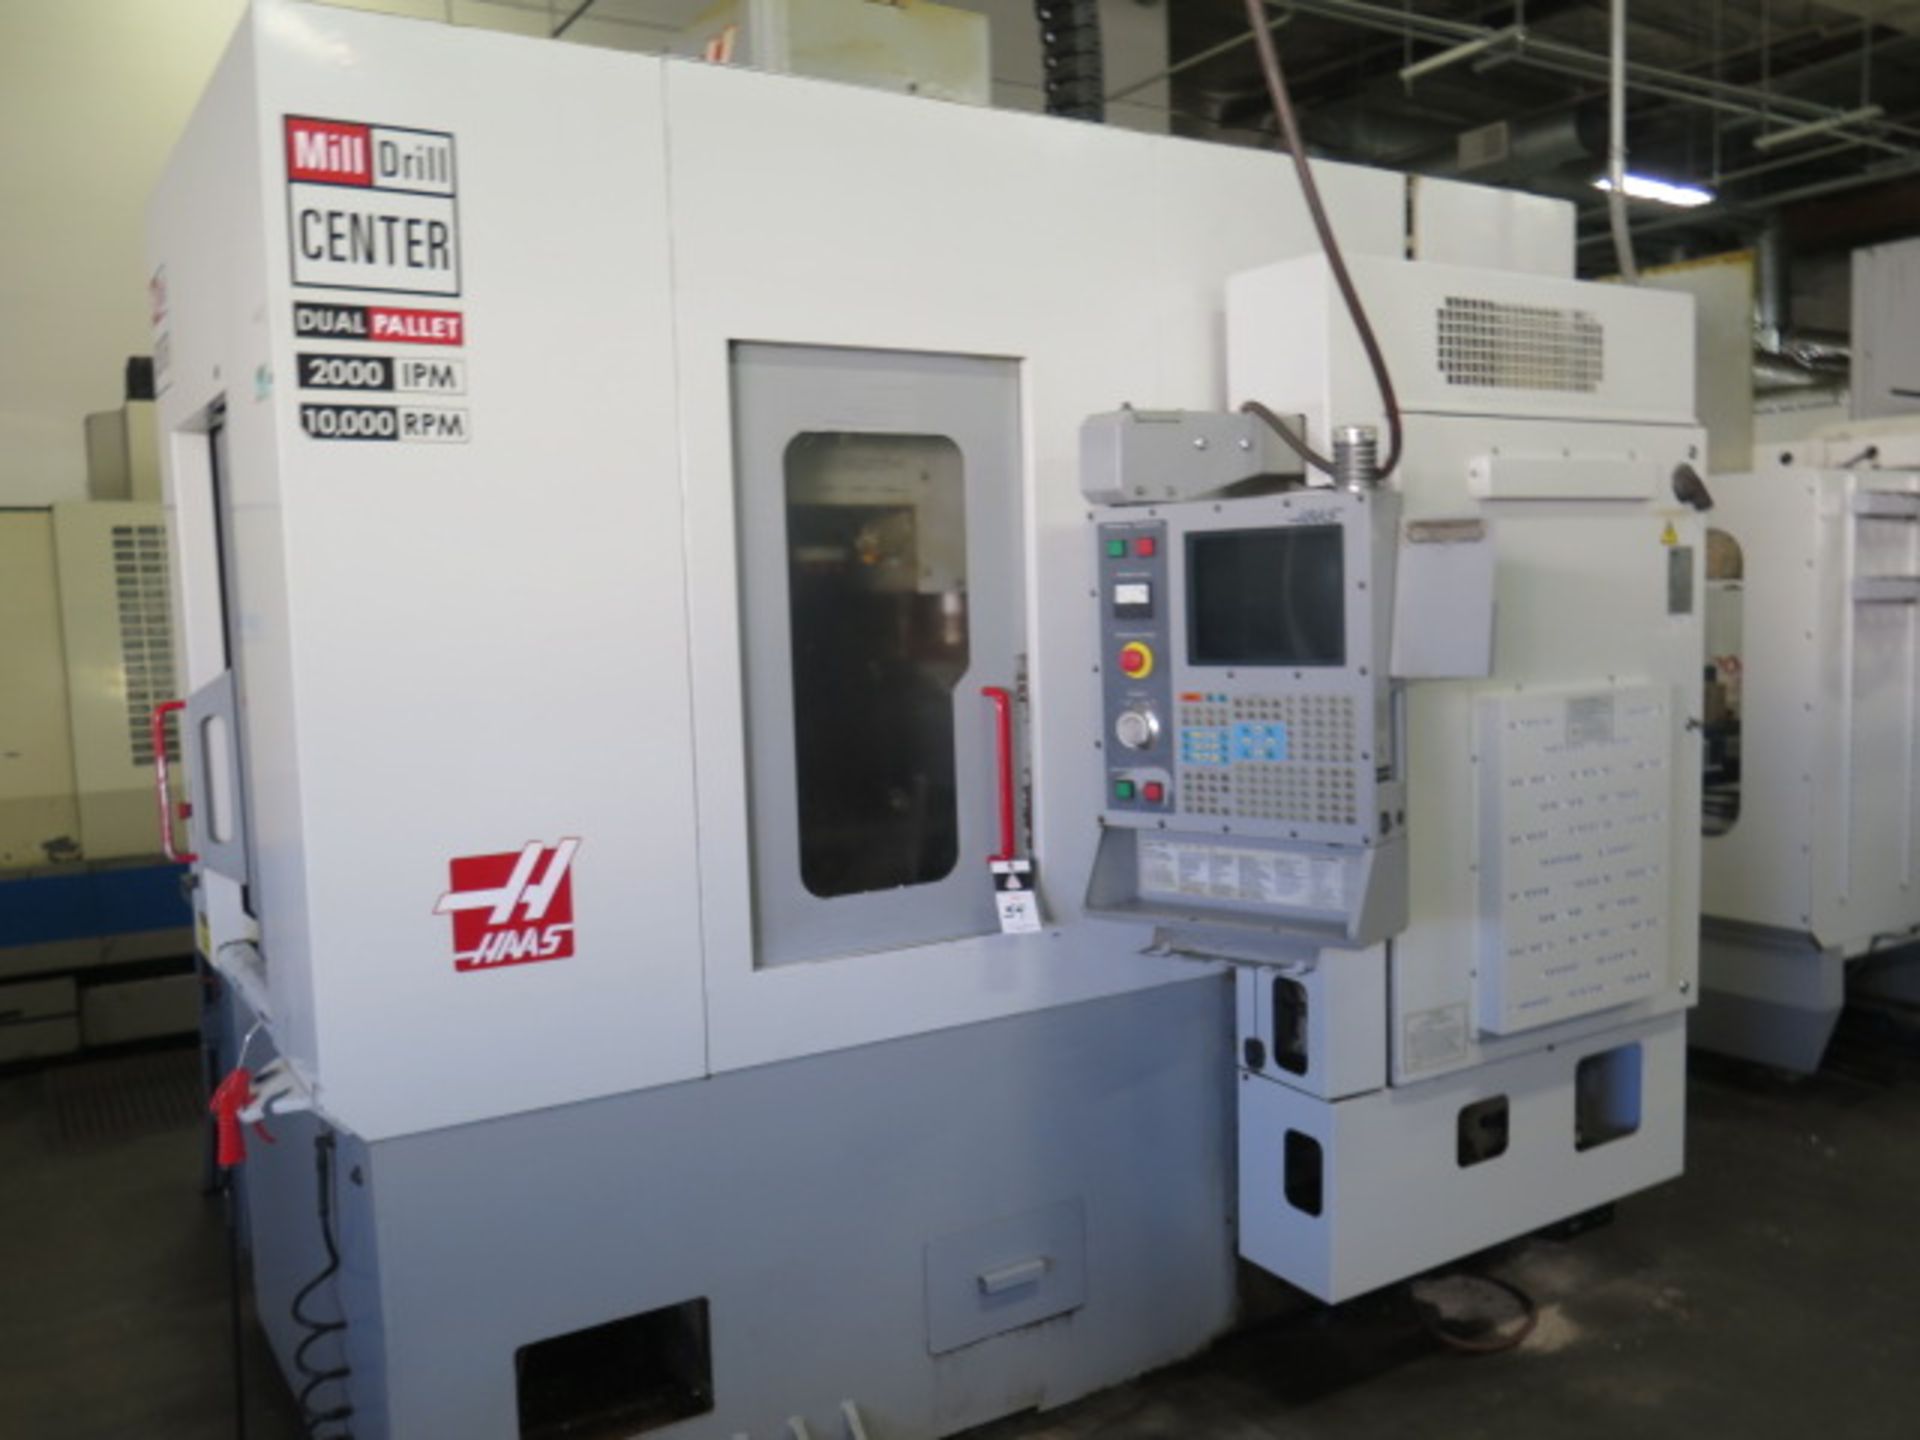 2002 Haas MDC-1 Dual Pallet CNC Milling Center s/n 29420 (Pallet Changer Needs Repair), SOLD AS IS - Image 2 of 16